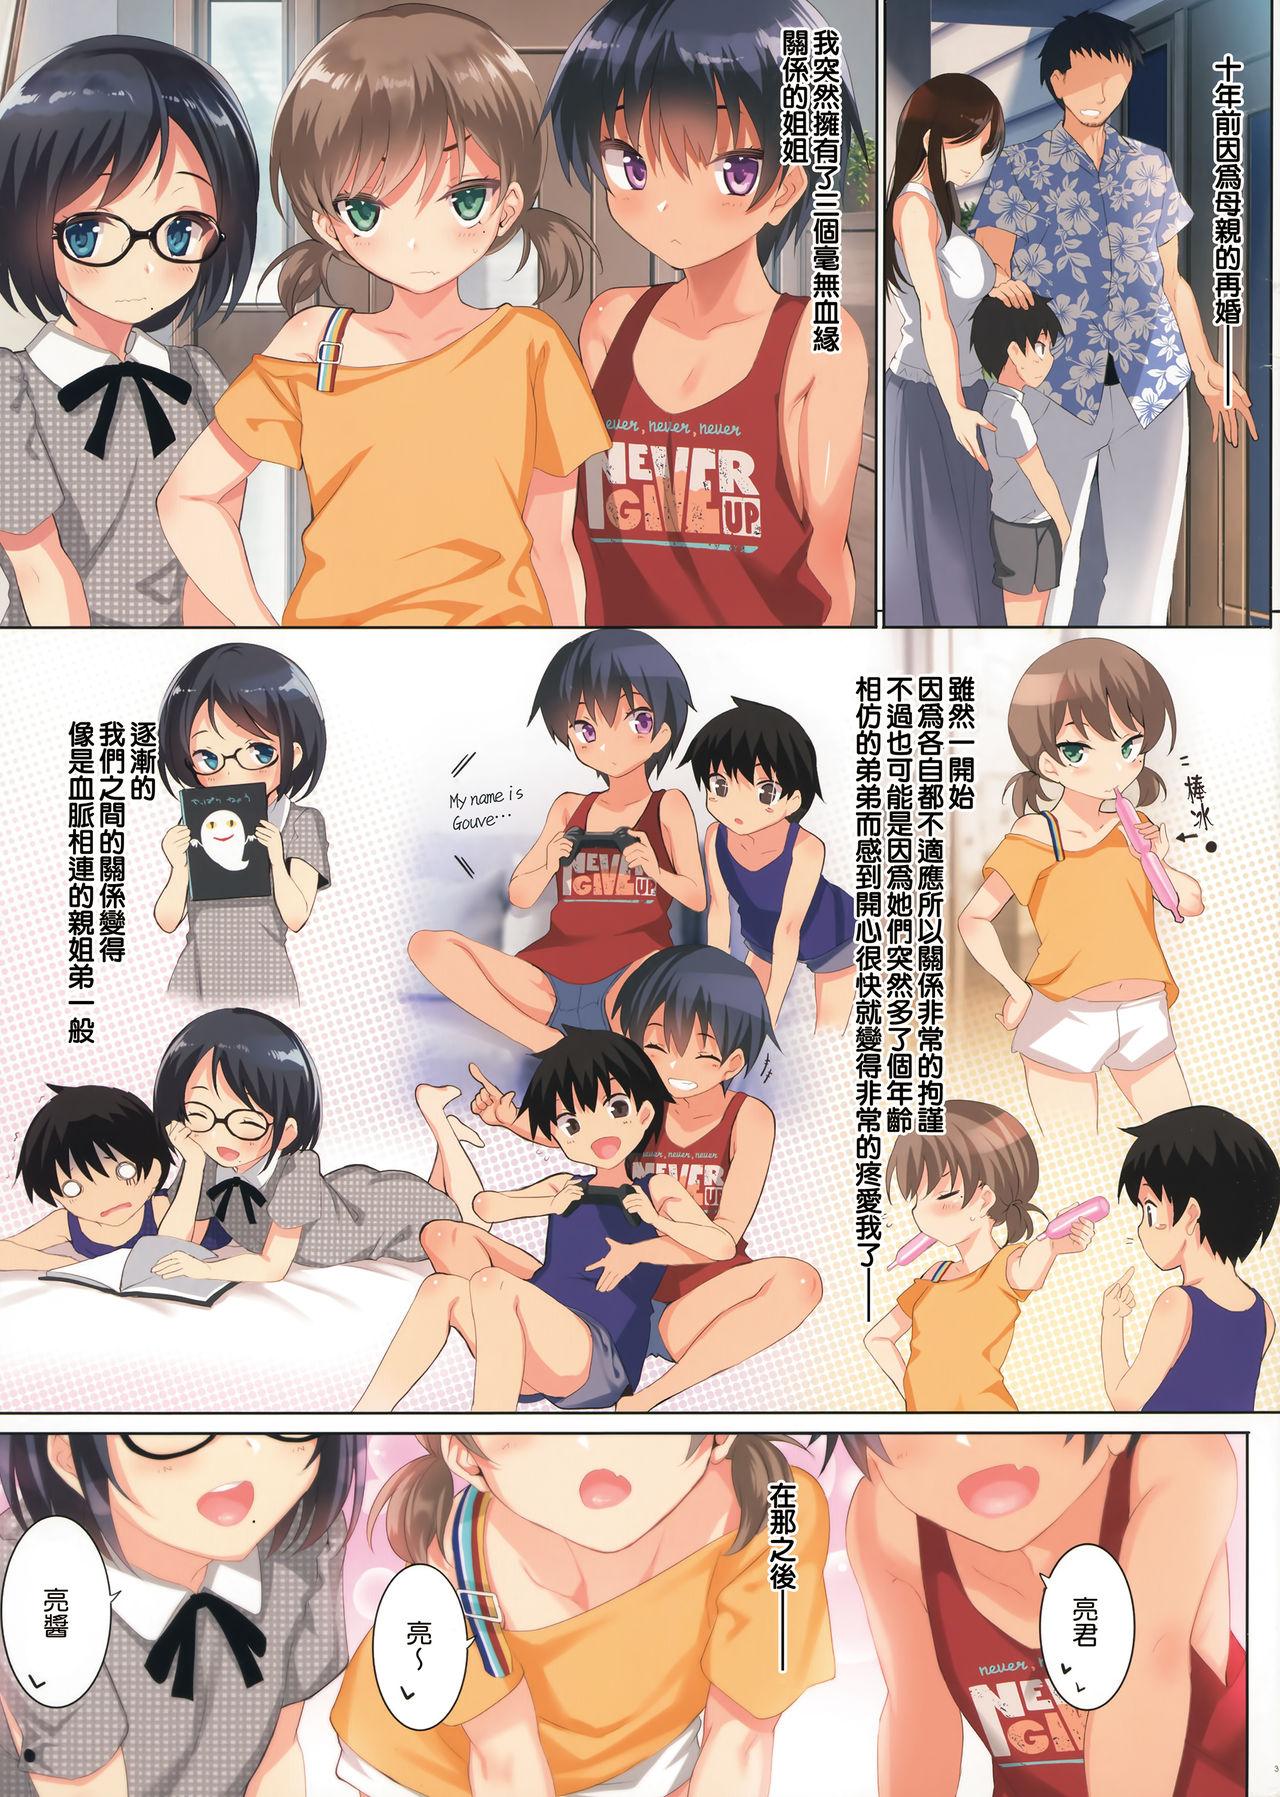 Little (C96) [clesta (Cle Masahiro)] CL-orc 01 Ane Zanmai - Three sister's harem [Chinese] [無邪気漢化組] [Decensored] - Original And - Page 4